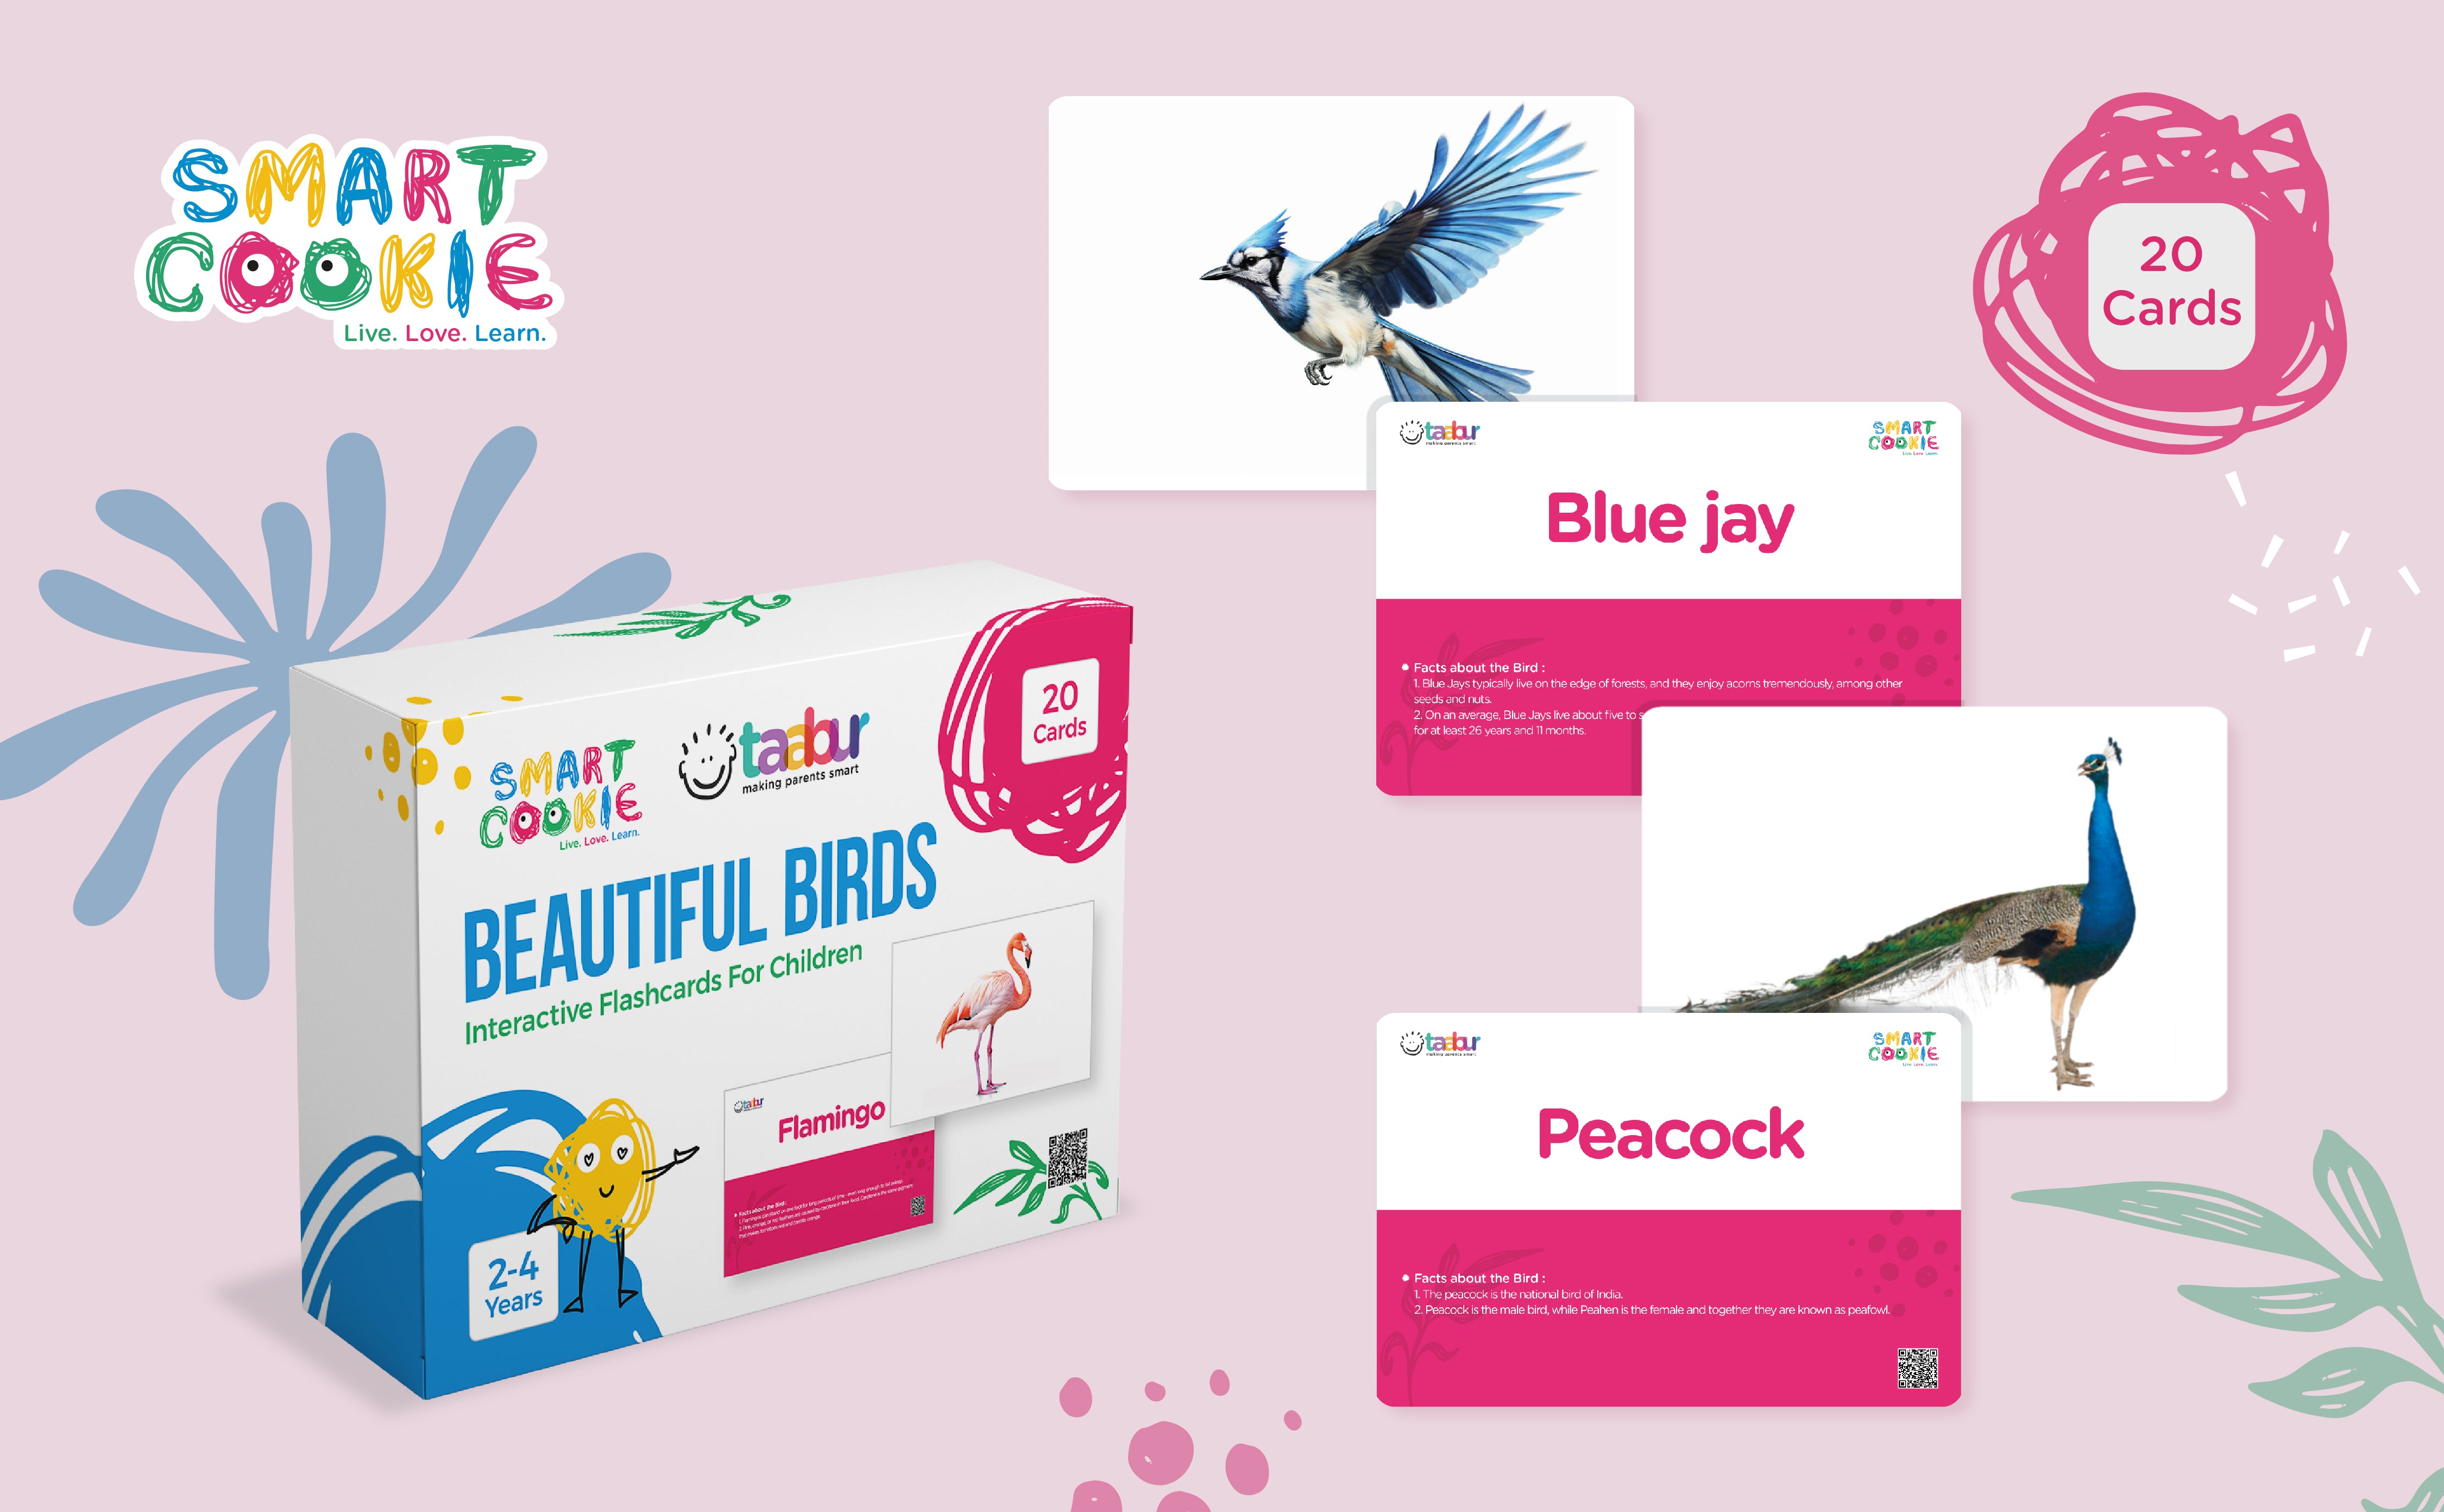 Beautiful Birds - Interactive Flash Cards for Children (20 Cards) - for Kids Aged 2 to 4 Years Old